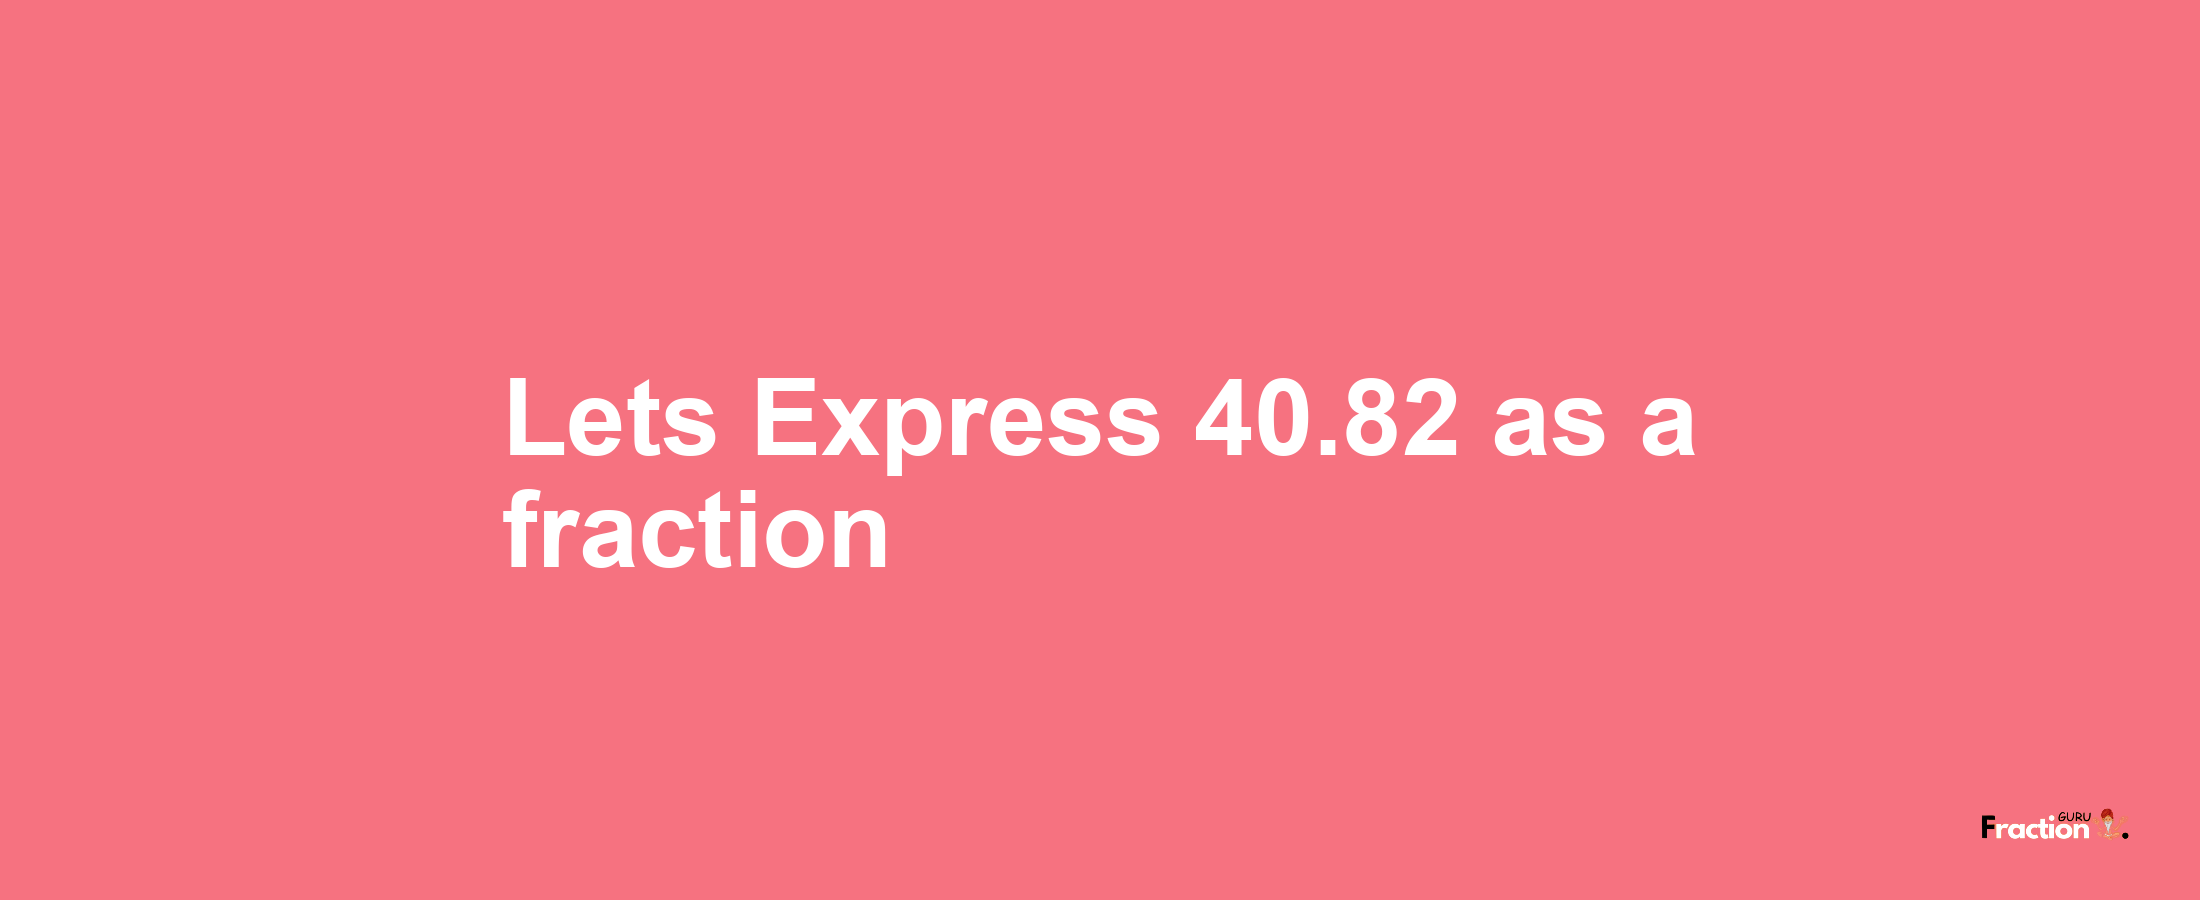 Lets Express 40.82 as afraction